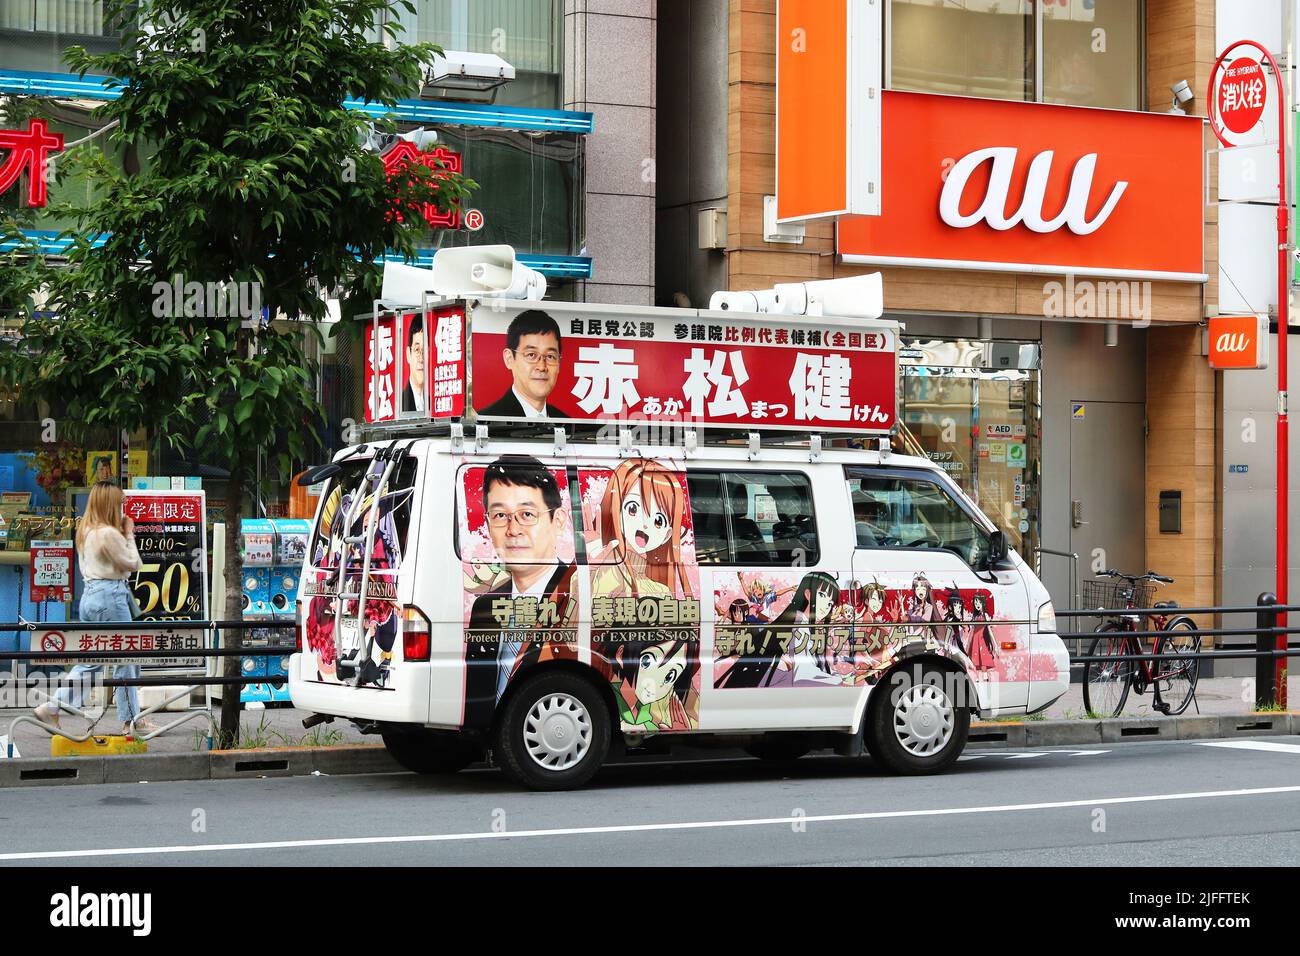 TOKYO, JAPAN - June 29, 2022: A House of Councillors candidate's election campaign vehicle with manga / anime design parked in Tokyo's Akihabara area. Stock Photo